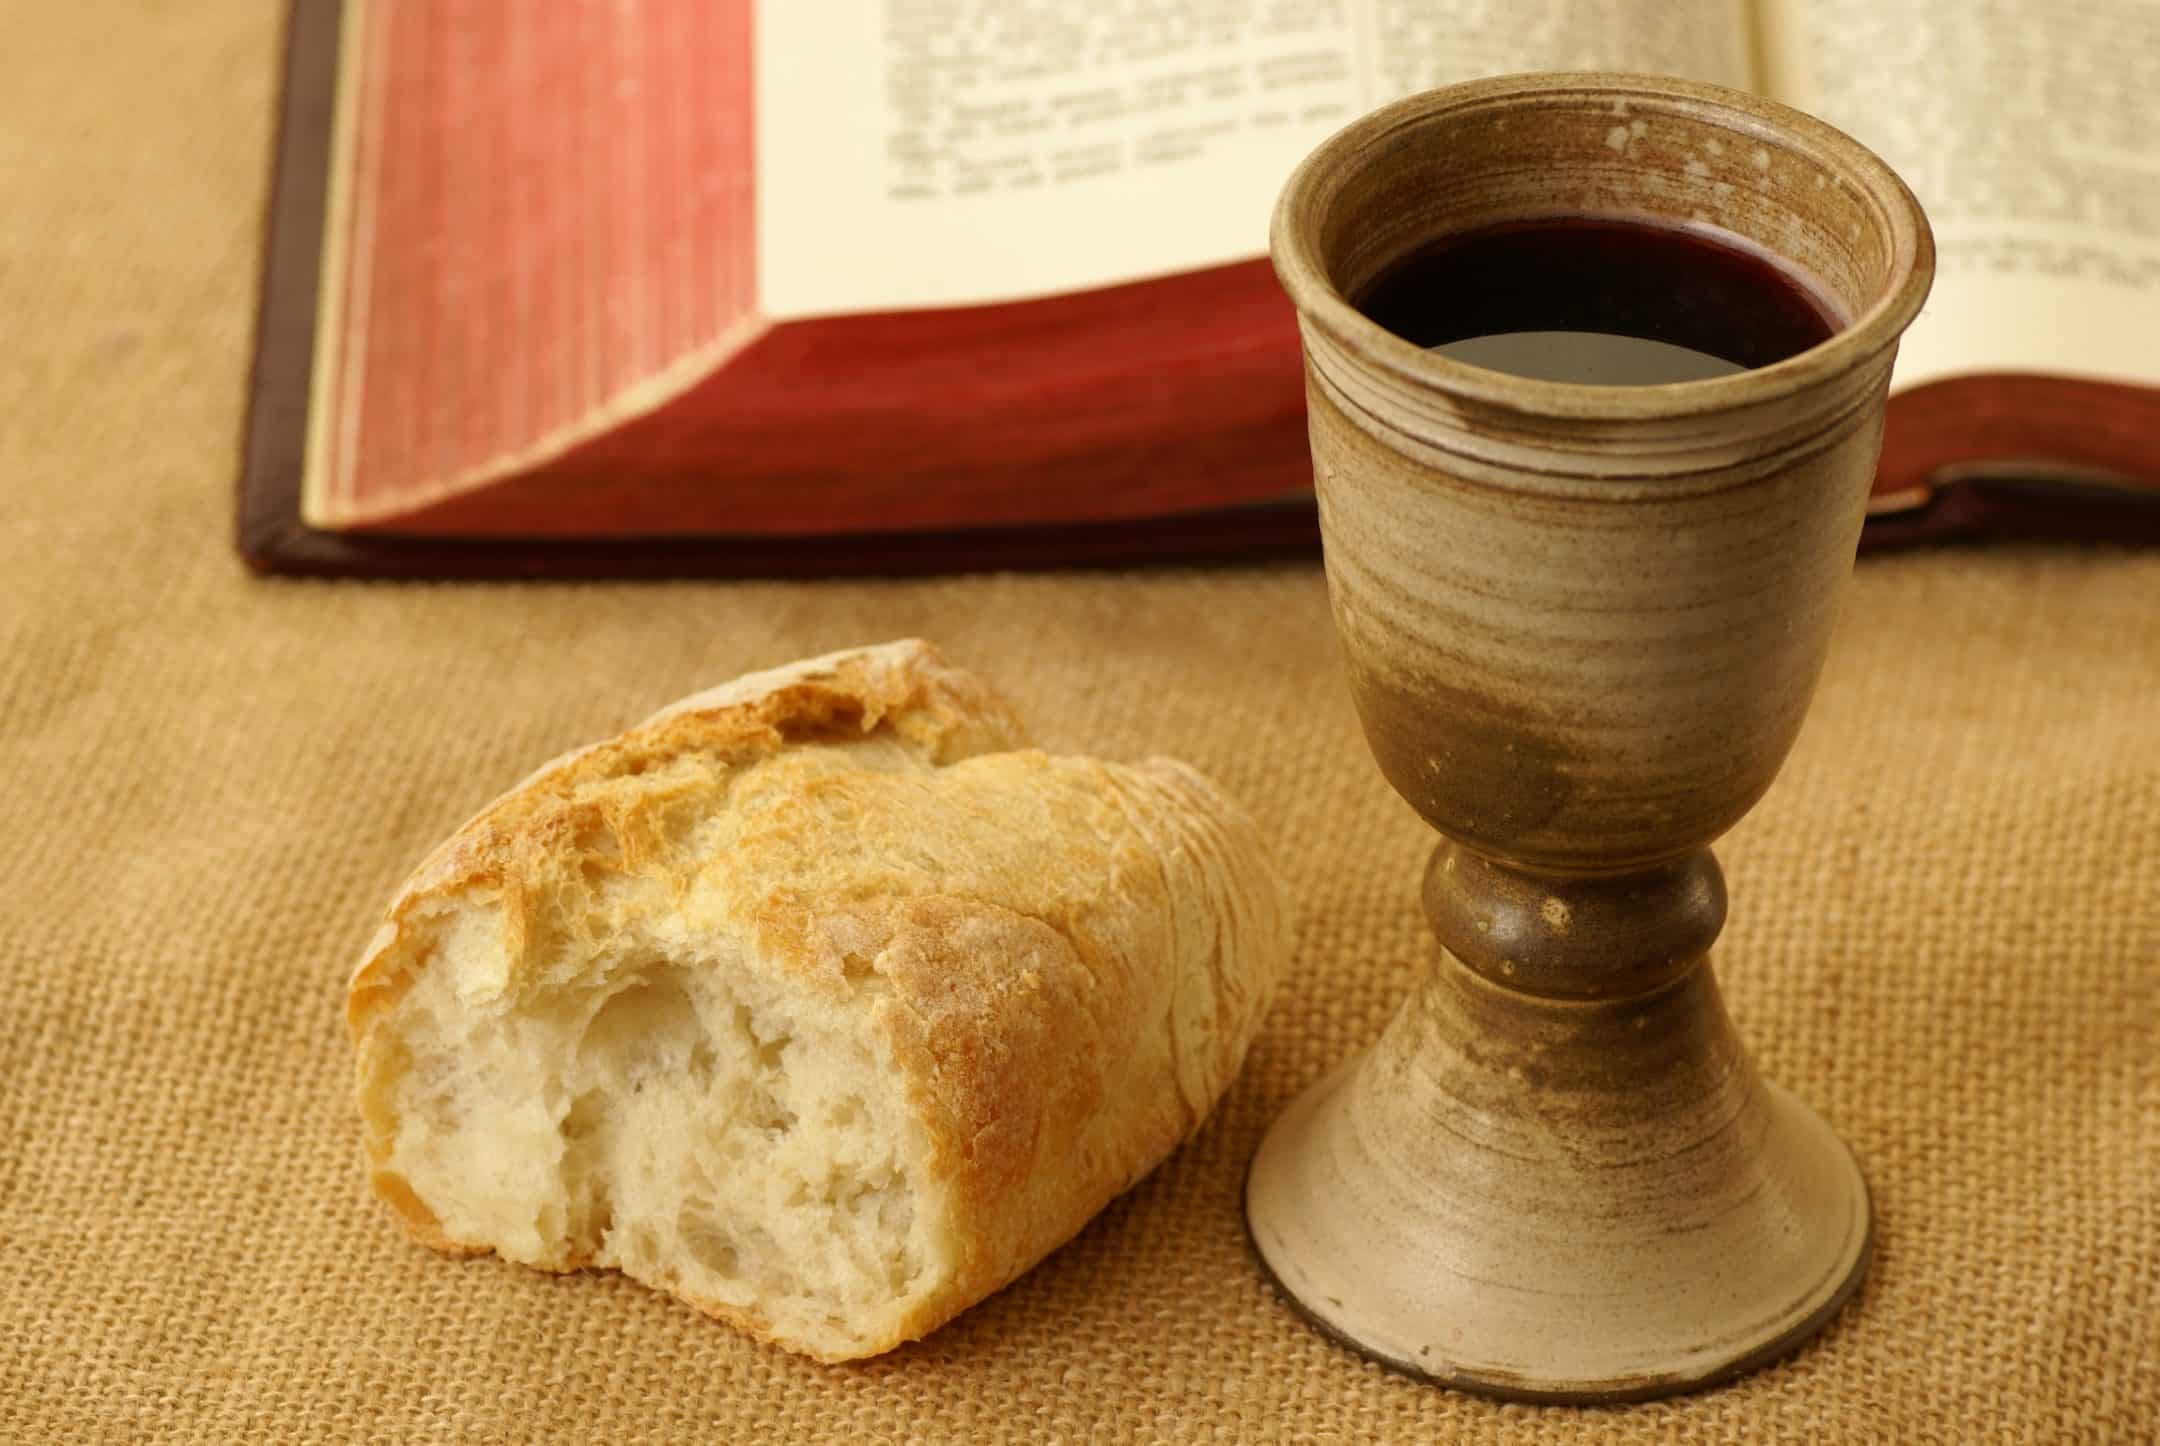 bible and bread and wine for communion